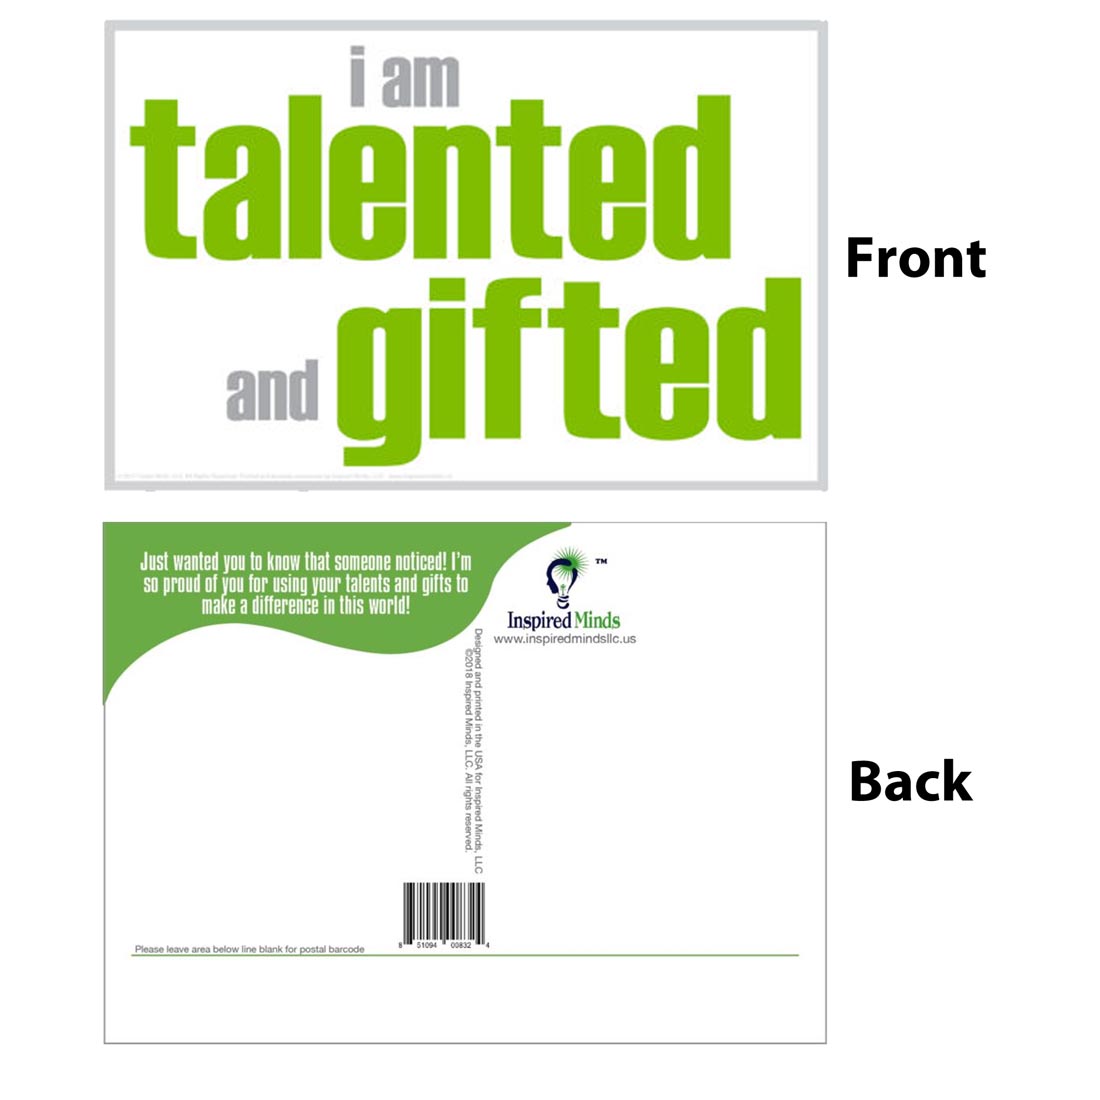 Front and back of the I Am Talented and Gifted Postcard